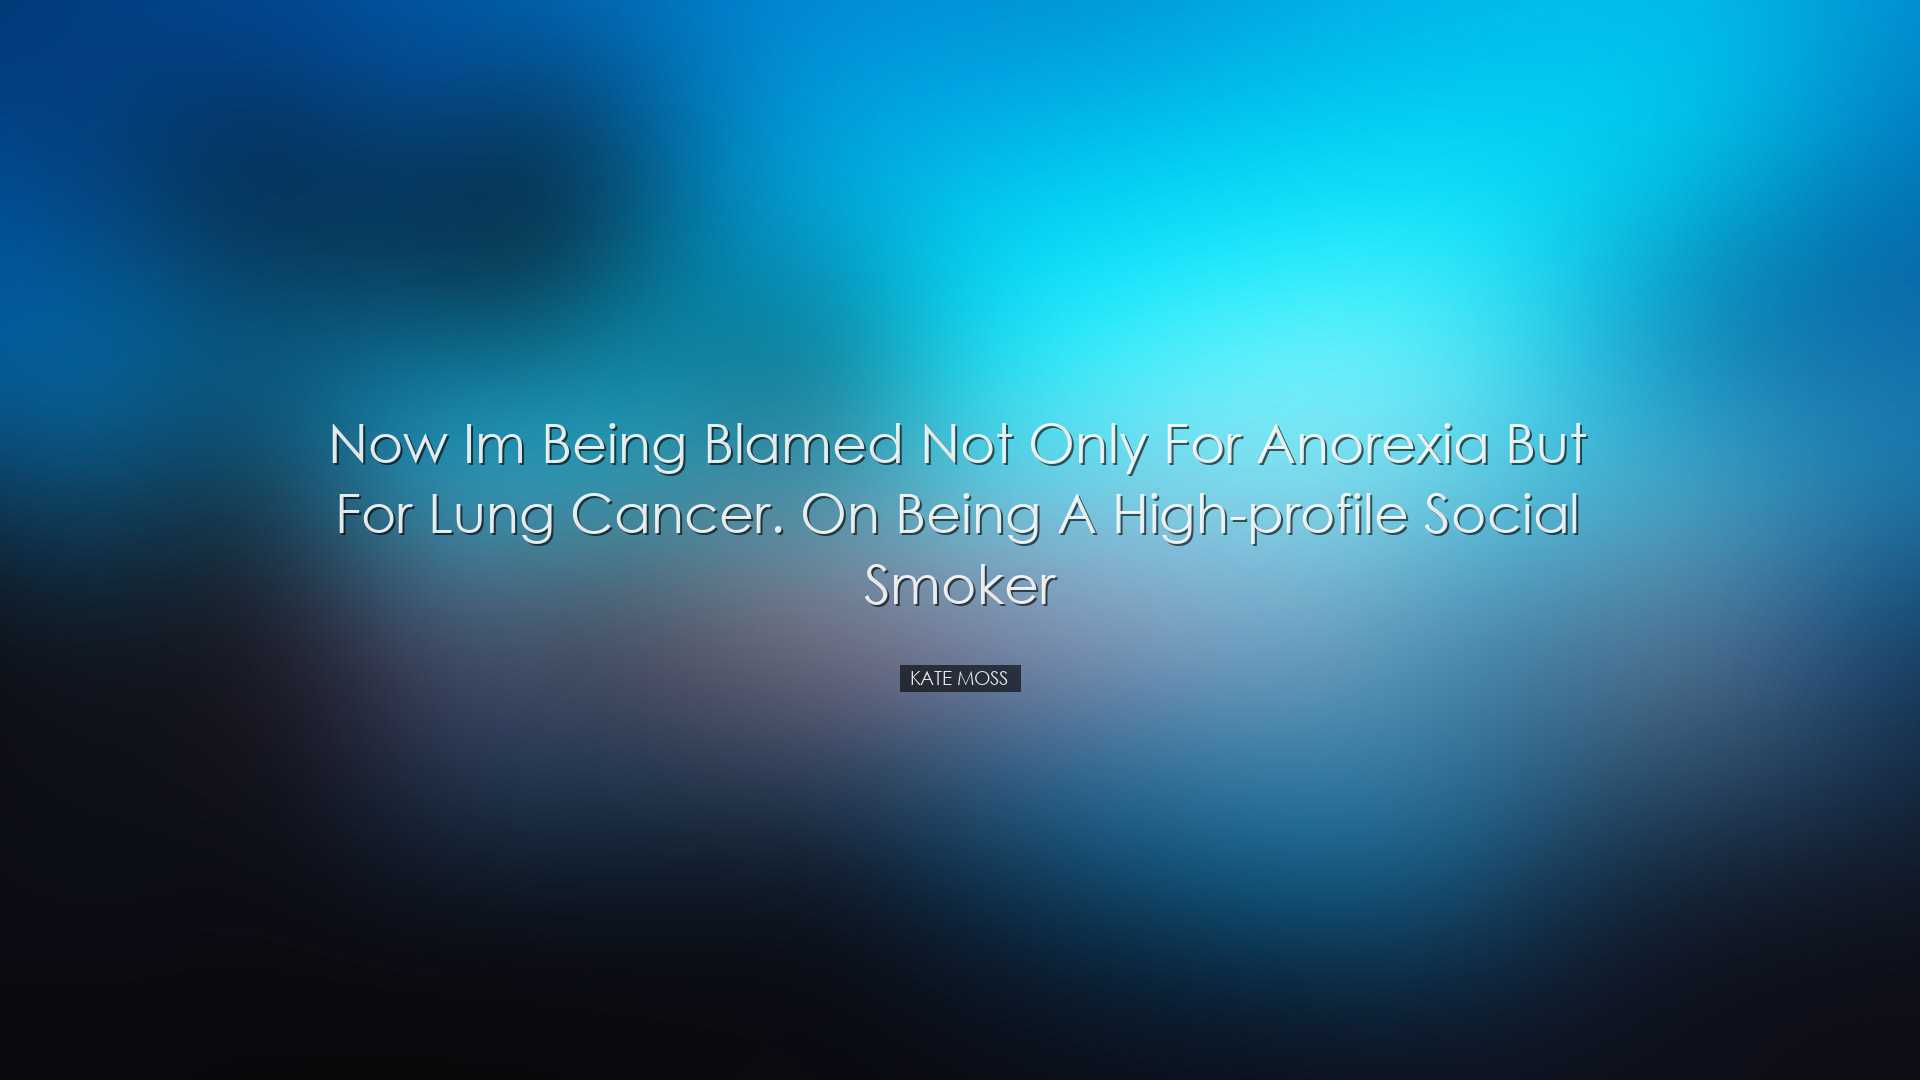 Now Im being blamed not only for anorexia but for lung cancer. On